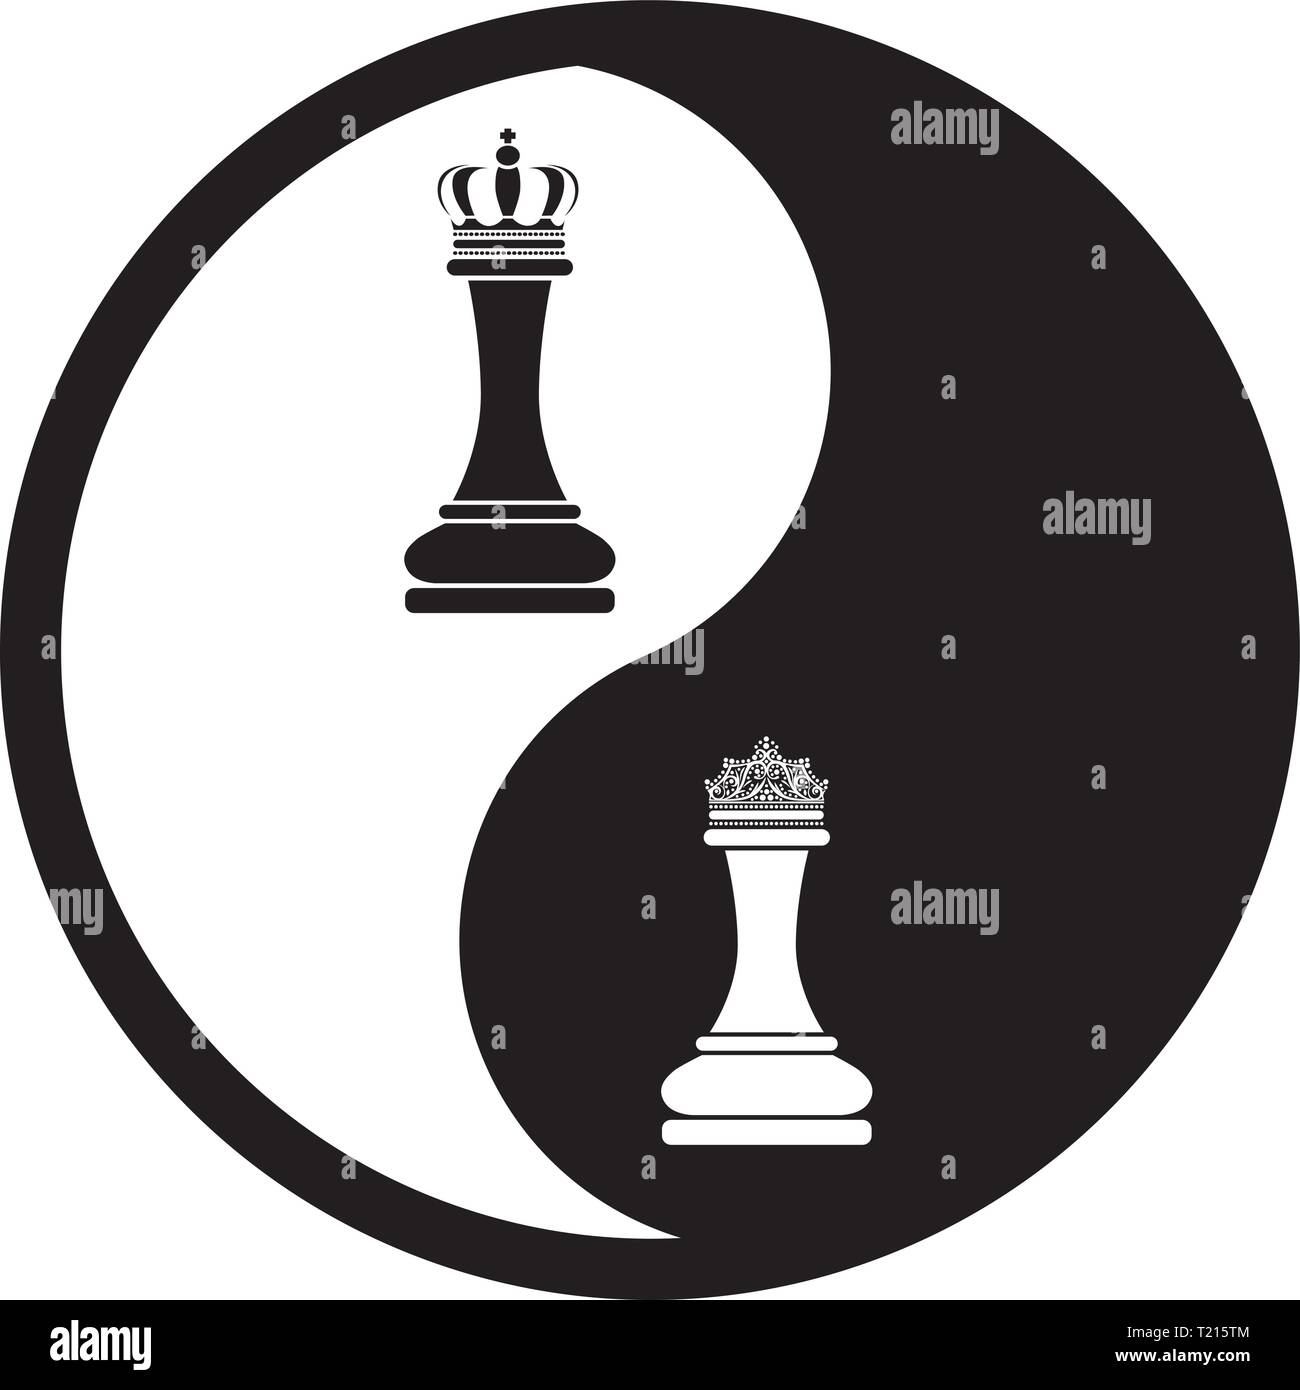 Black And White Yin Yang Logo.King And Queen Chess Figure Stock Vector